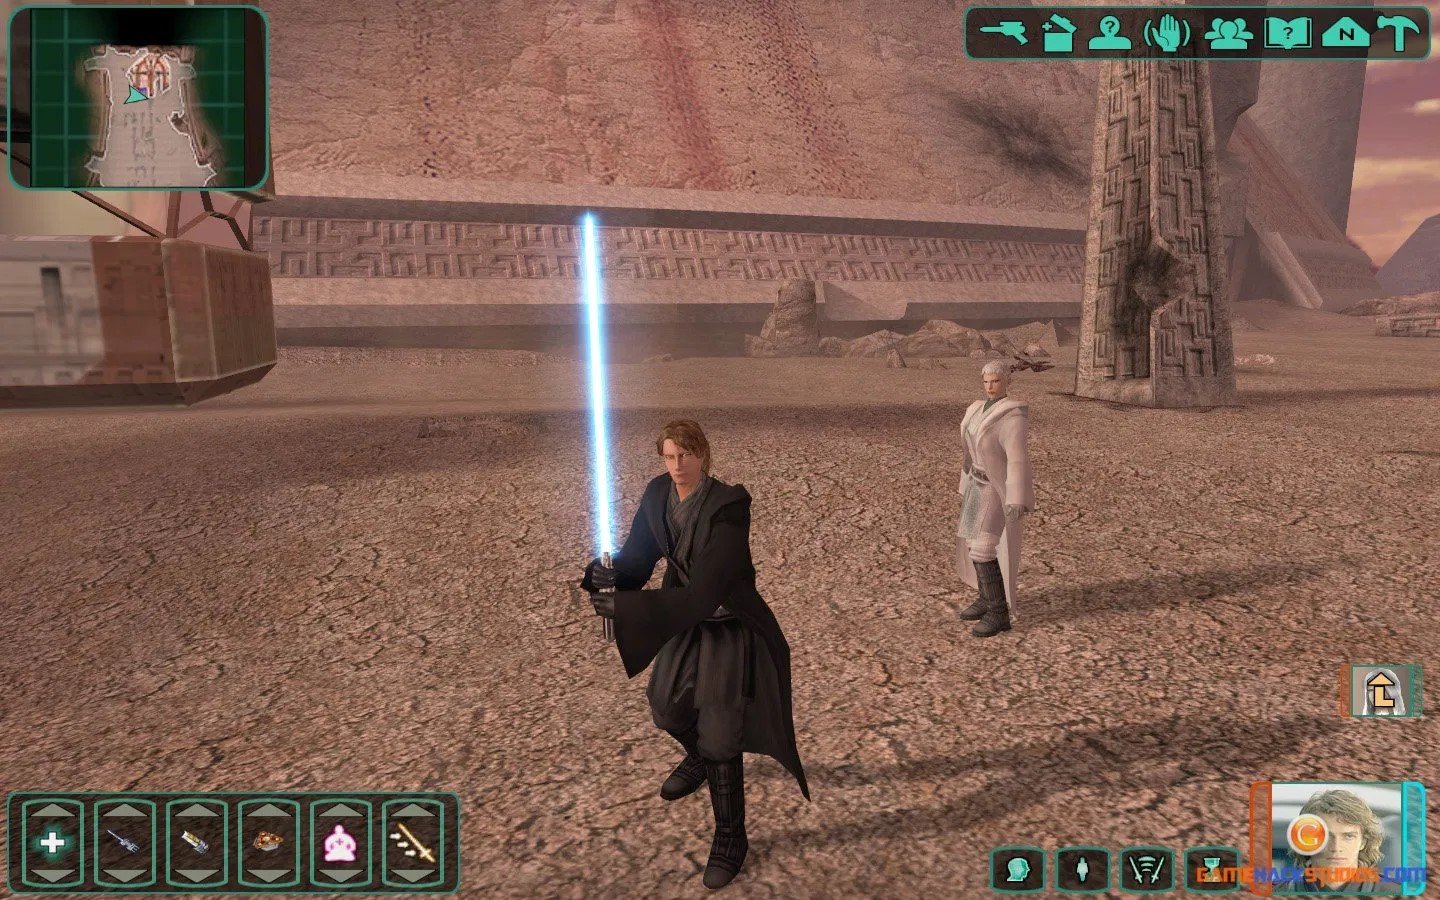 Скриншот 3 к игре Star Wars: Knights of the Old Republic II - The Sith Lords v.1.0b [GOG] (2004)